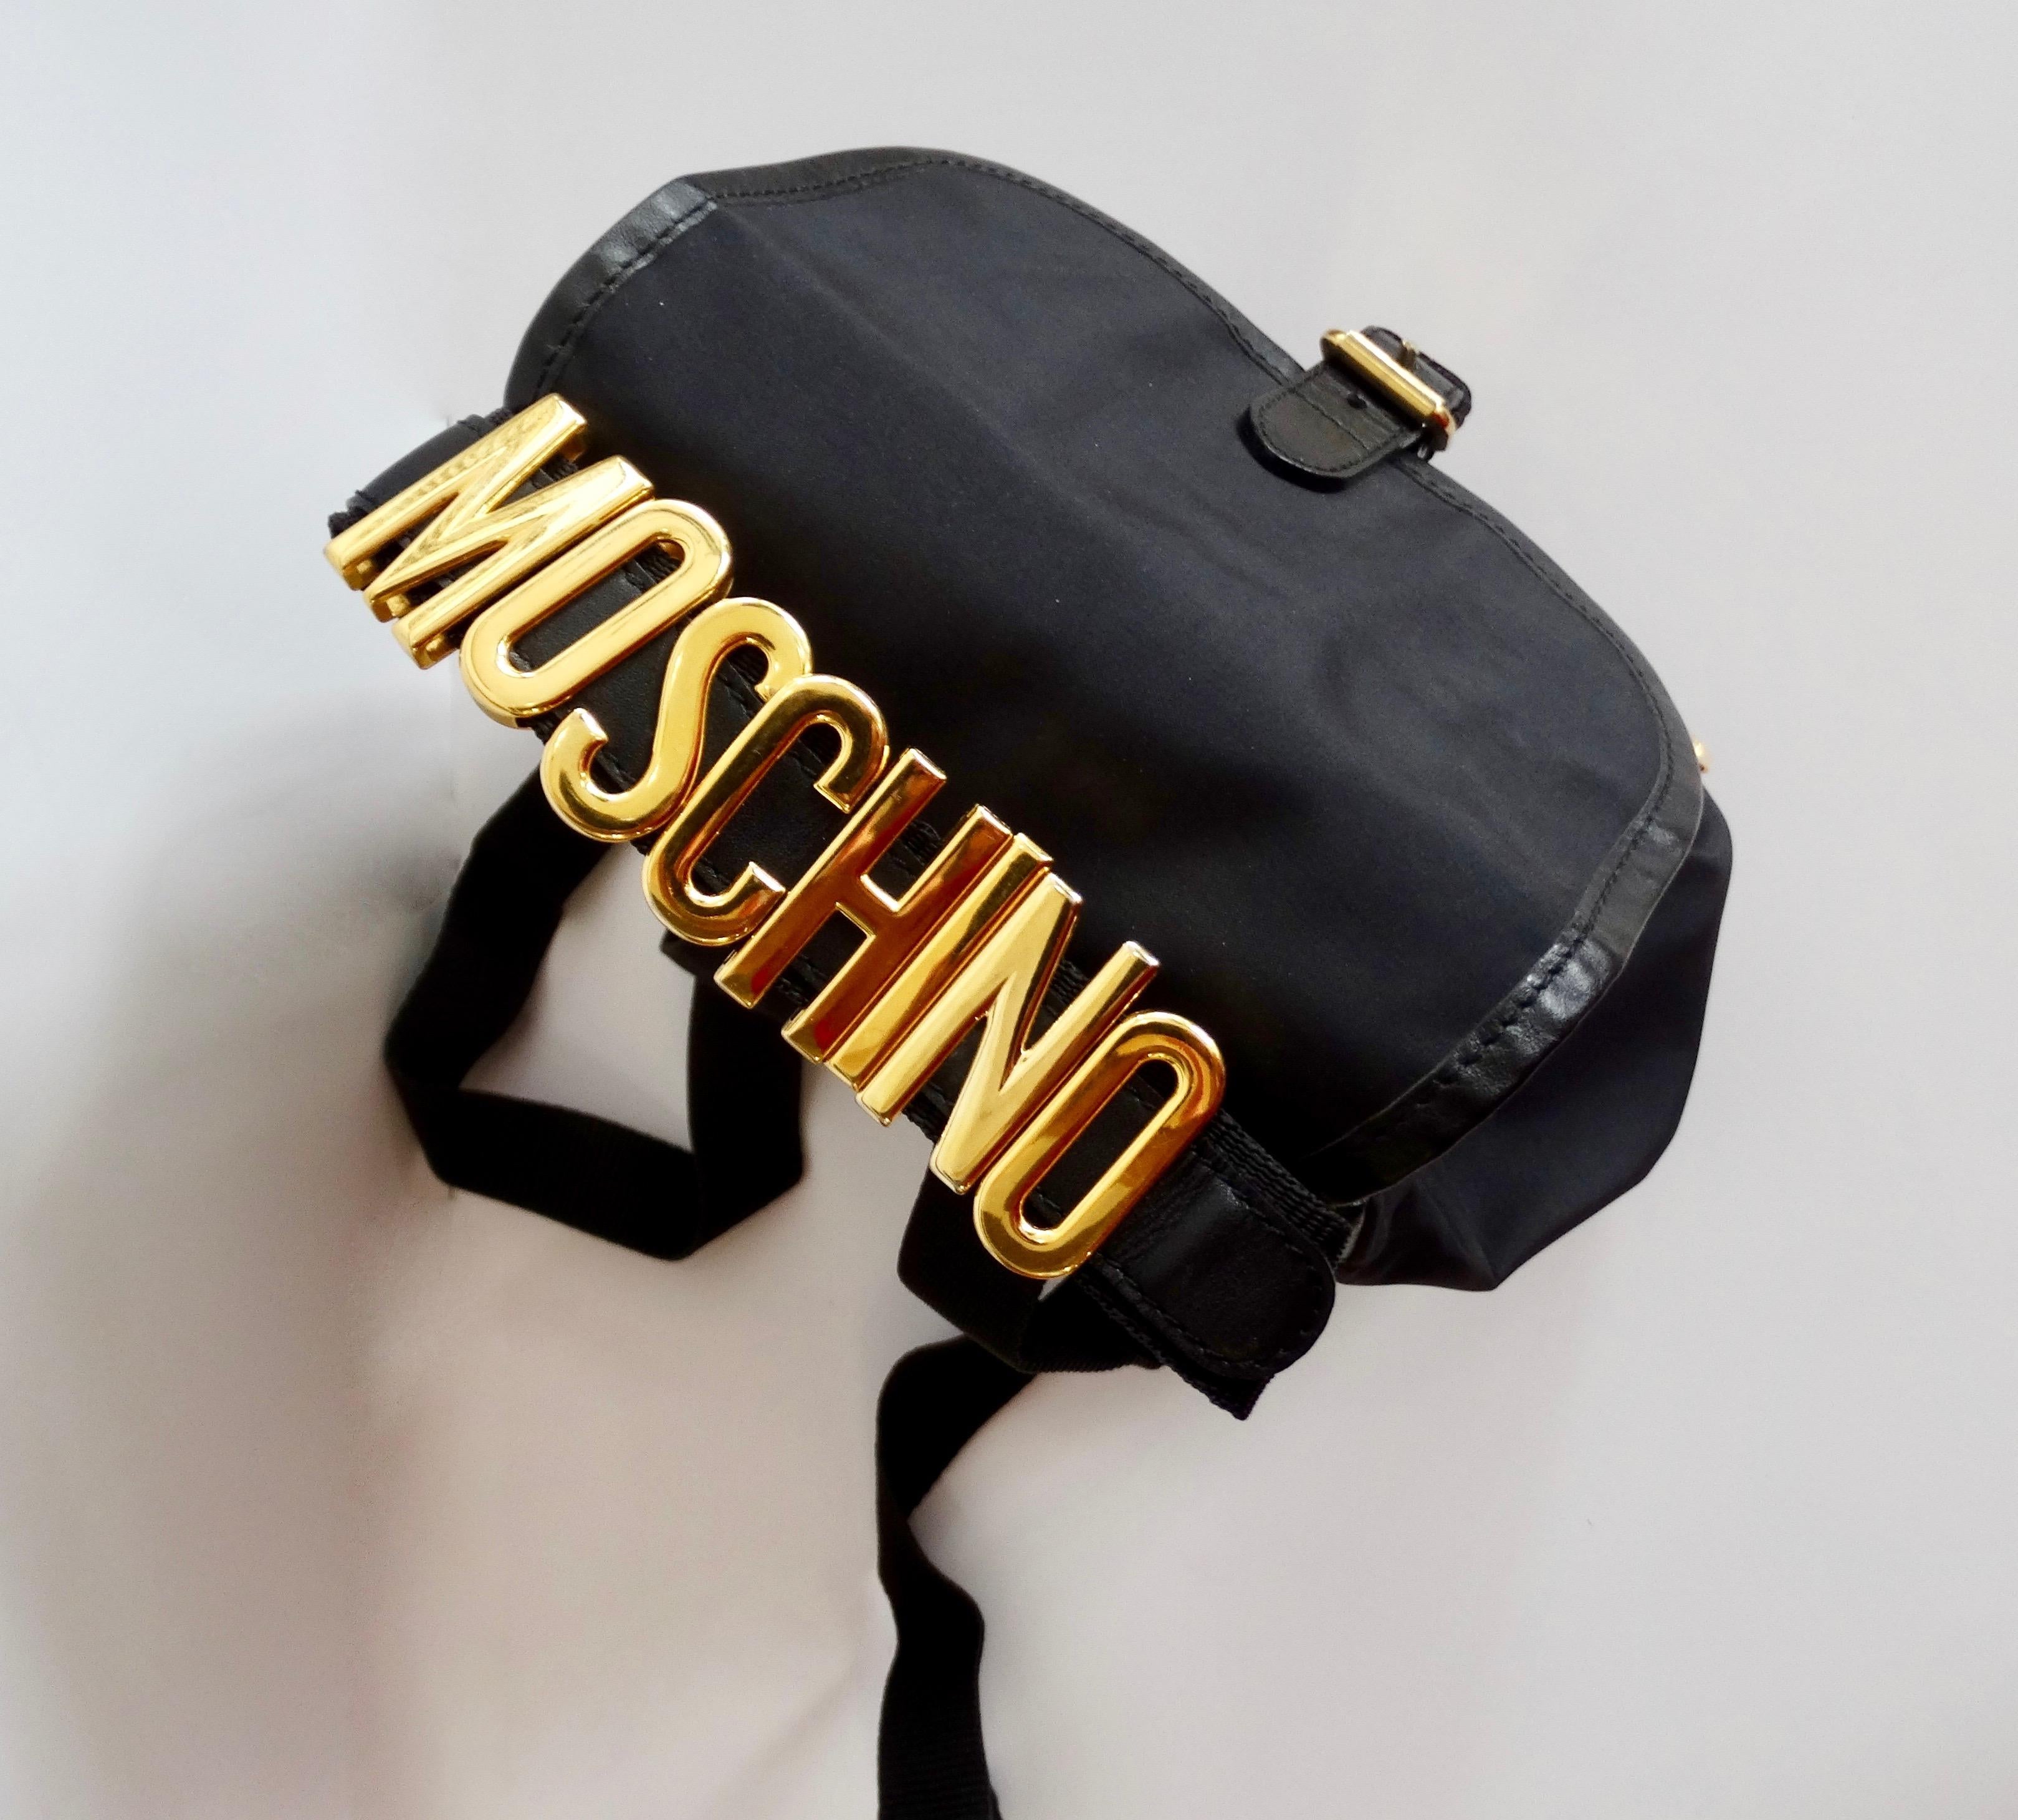 Always be ready to go with this adorable Moschino backpack! Circa 1990s, this mini black nylon drawstring backpack includes a black leather trim and gold toned hardware. Features a belt style front flap closure, adjustable straps and an exterior